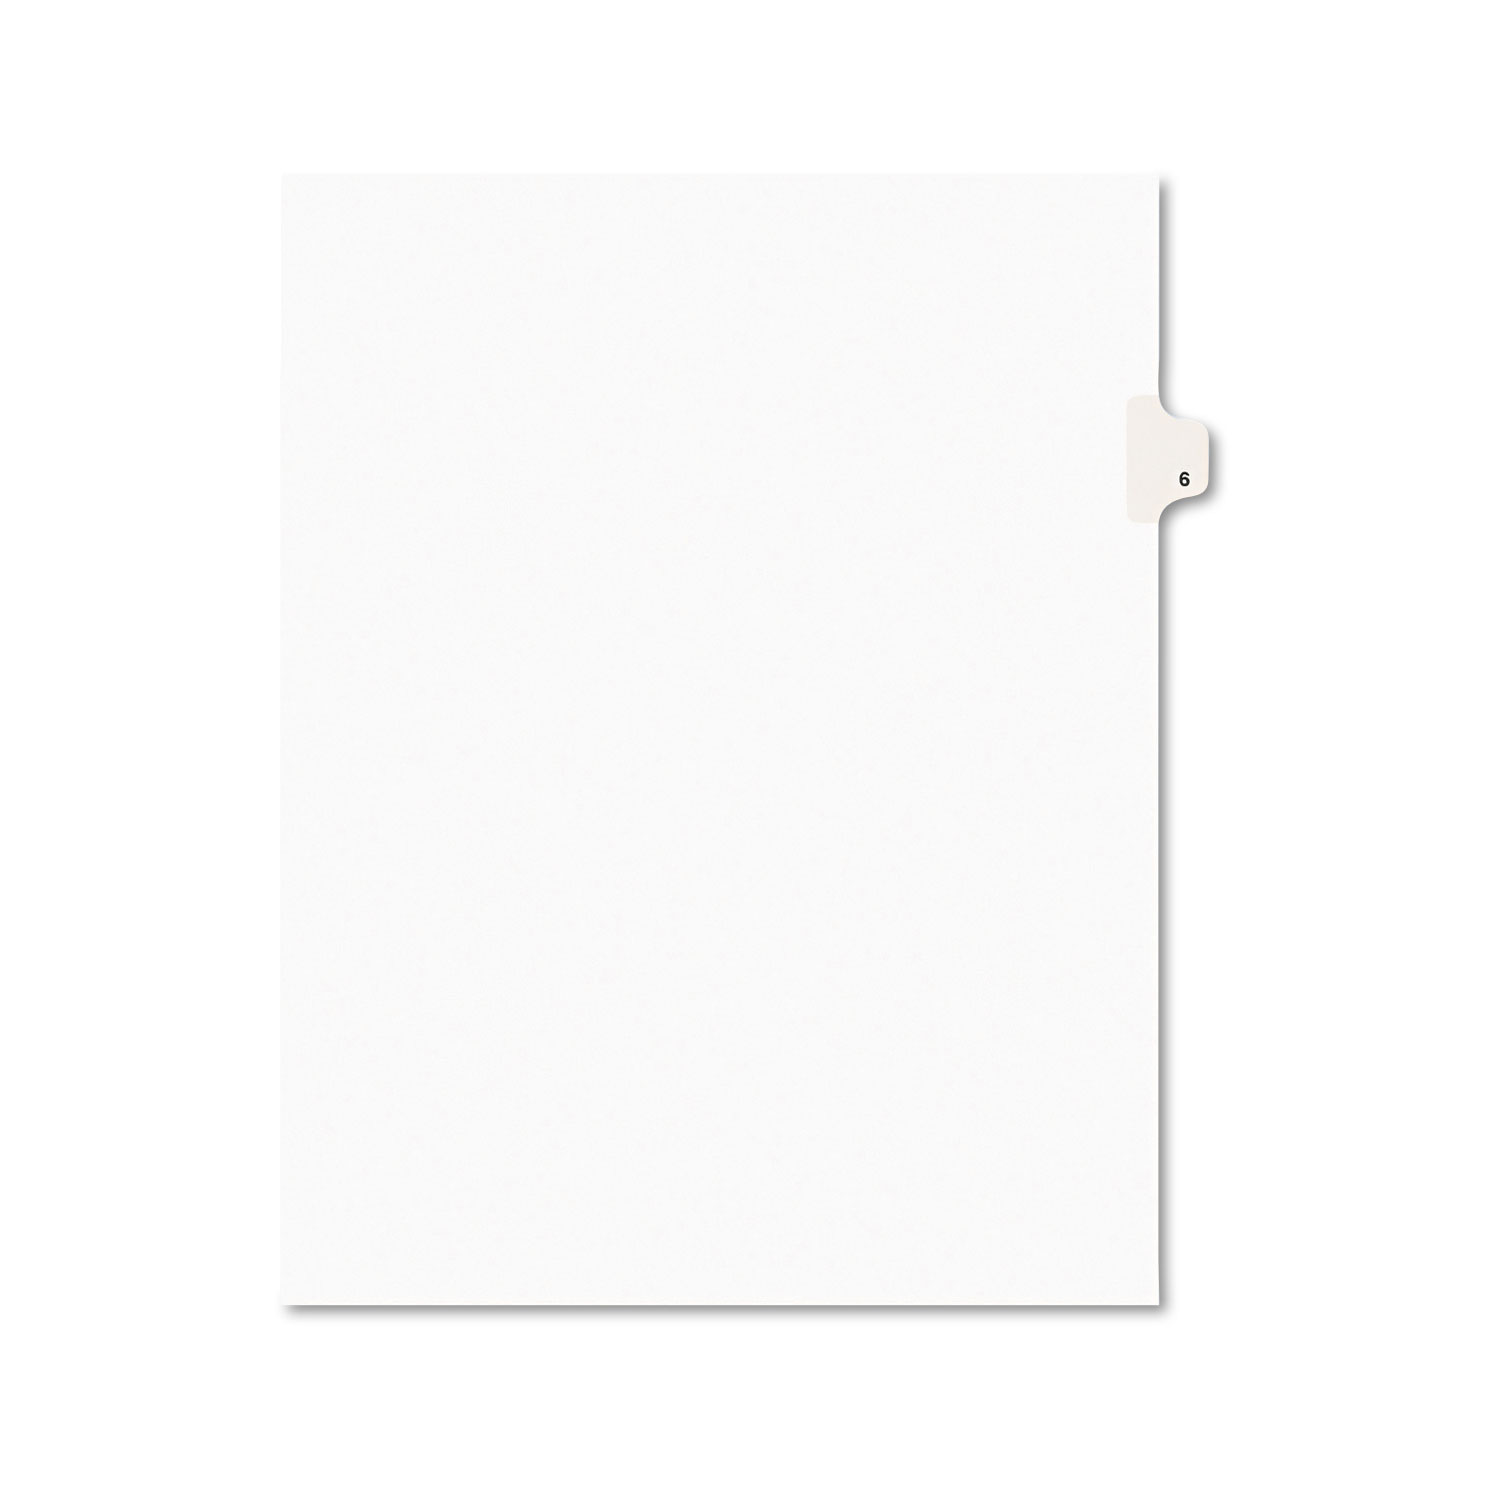  Avery 11916 Preprinted Legal Exhibit Side Tab Index Dividers, Avery Style, 10-Tab, 6, 11 x 8.5, White, 25/Pack (AVE11916) 